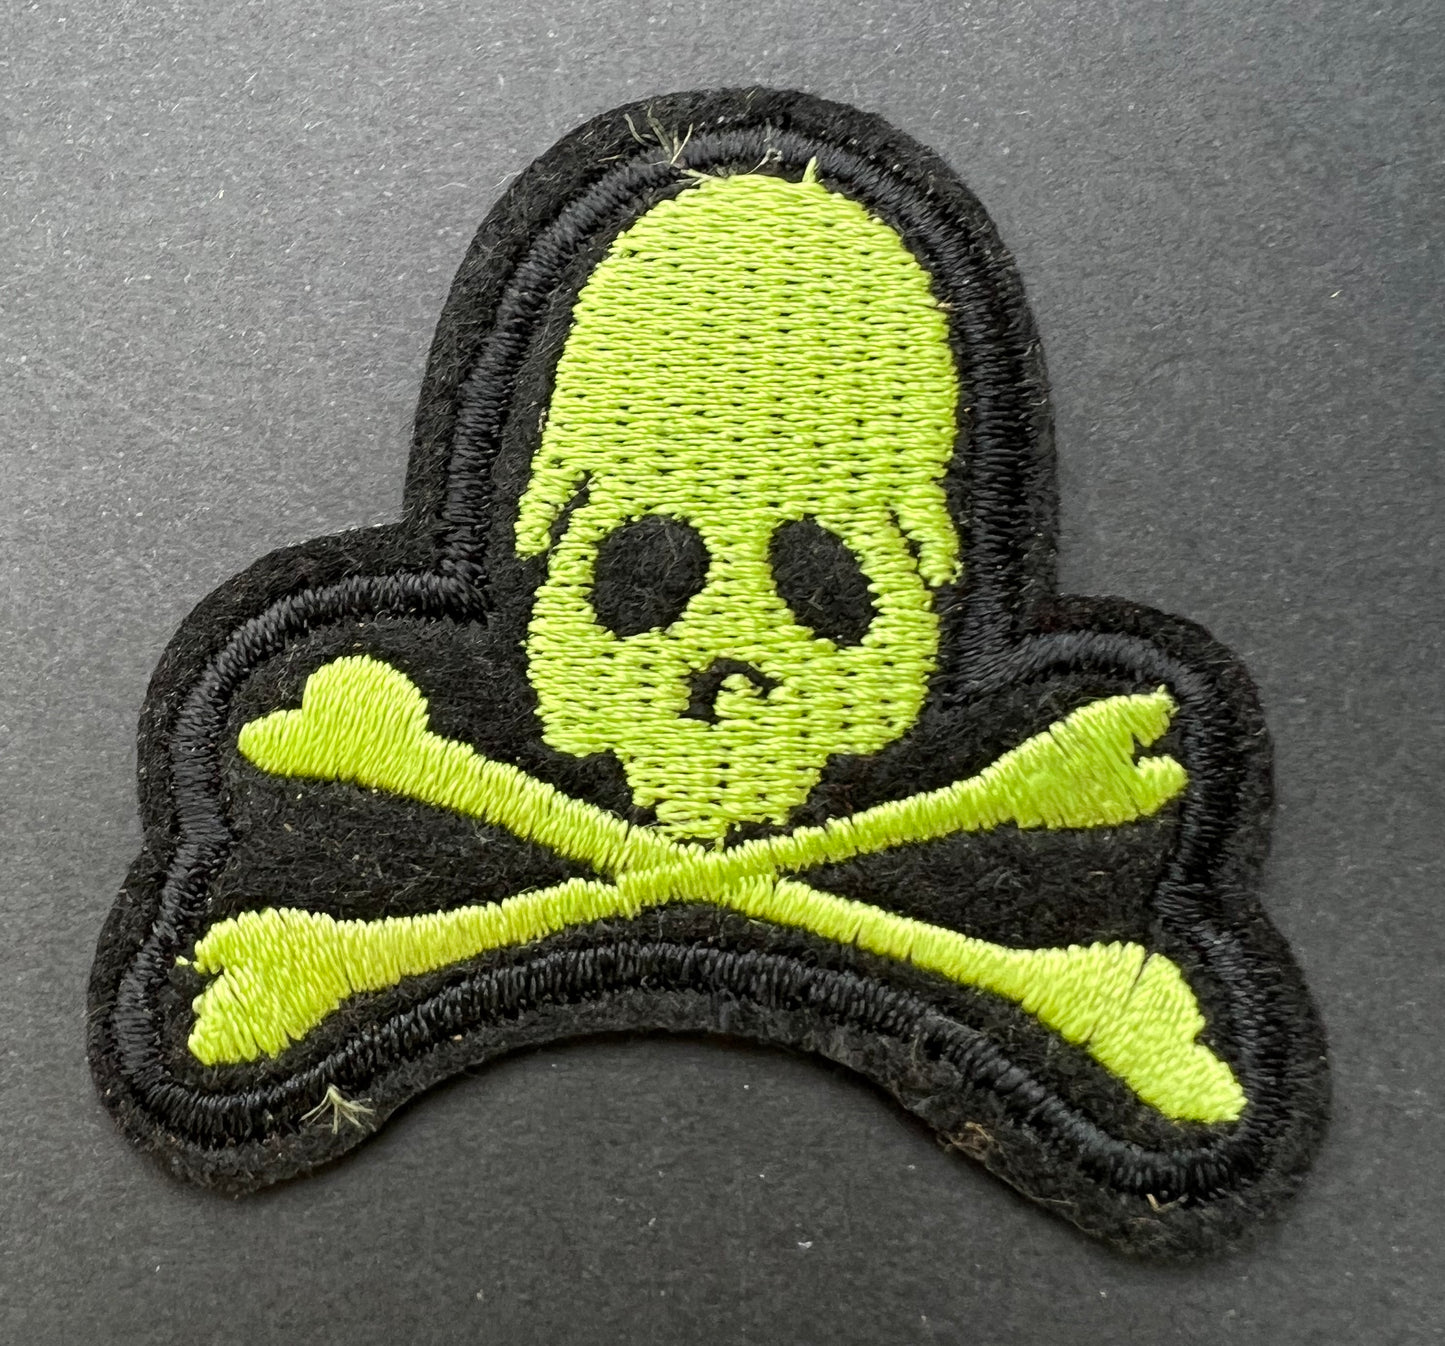 4.8cm Iron-On Skull and Crossbones Patch